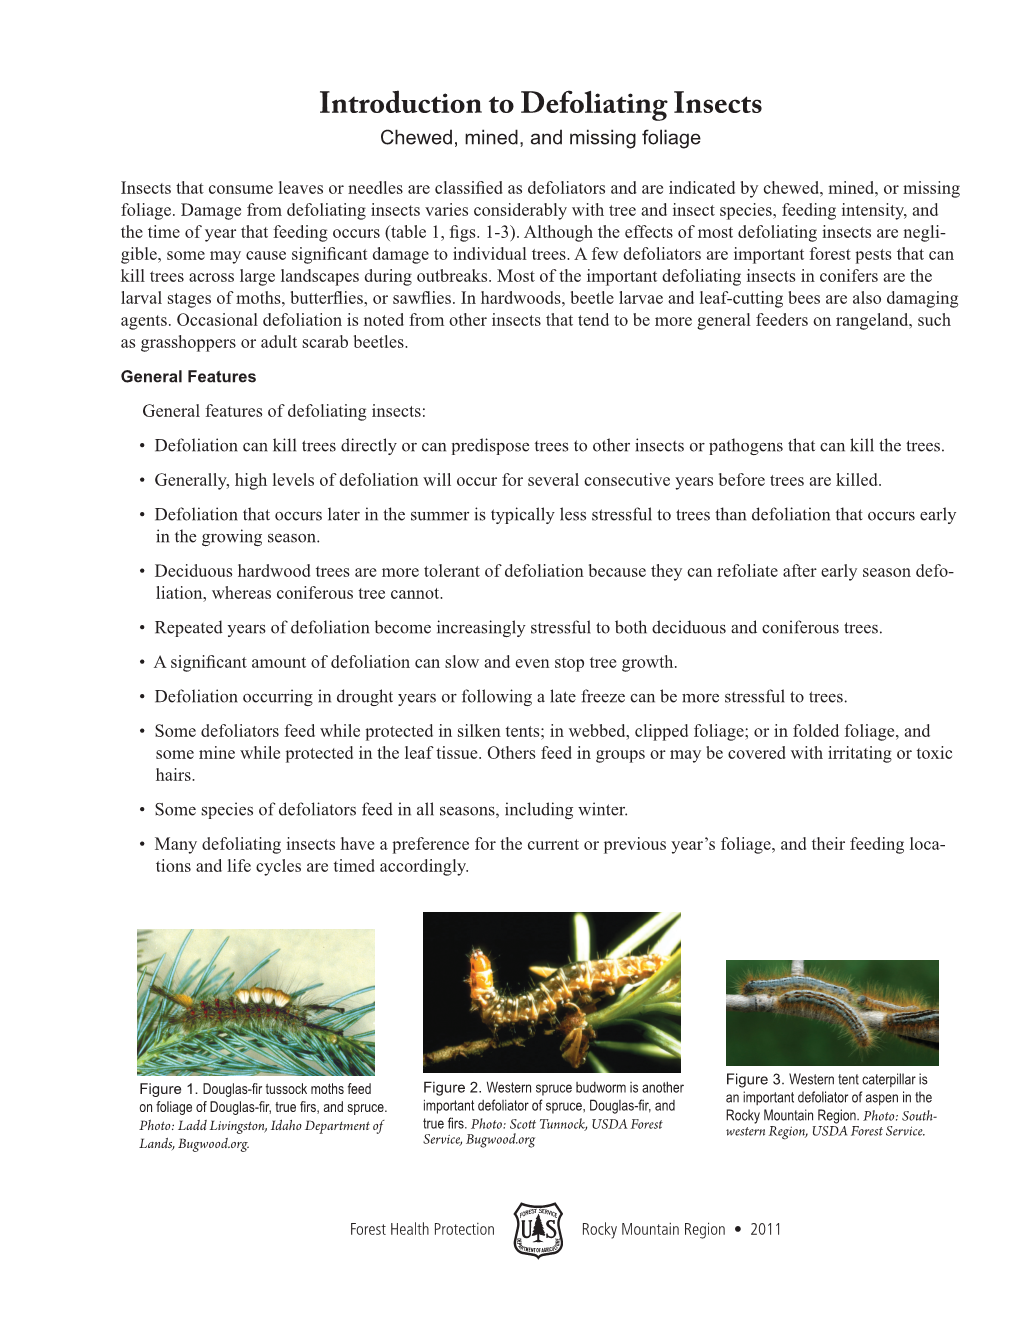 Introduction to Defoliating Insects Chewed, Mined, and Missing Foliage